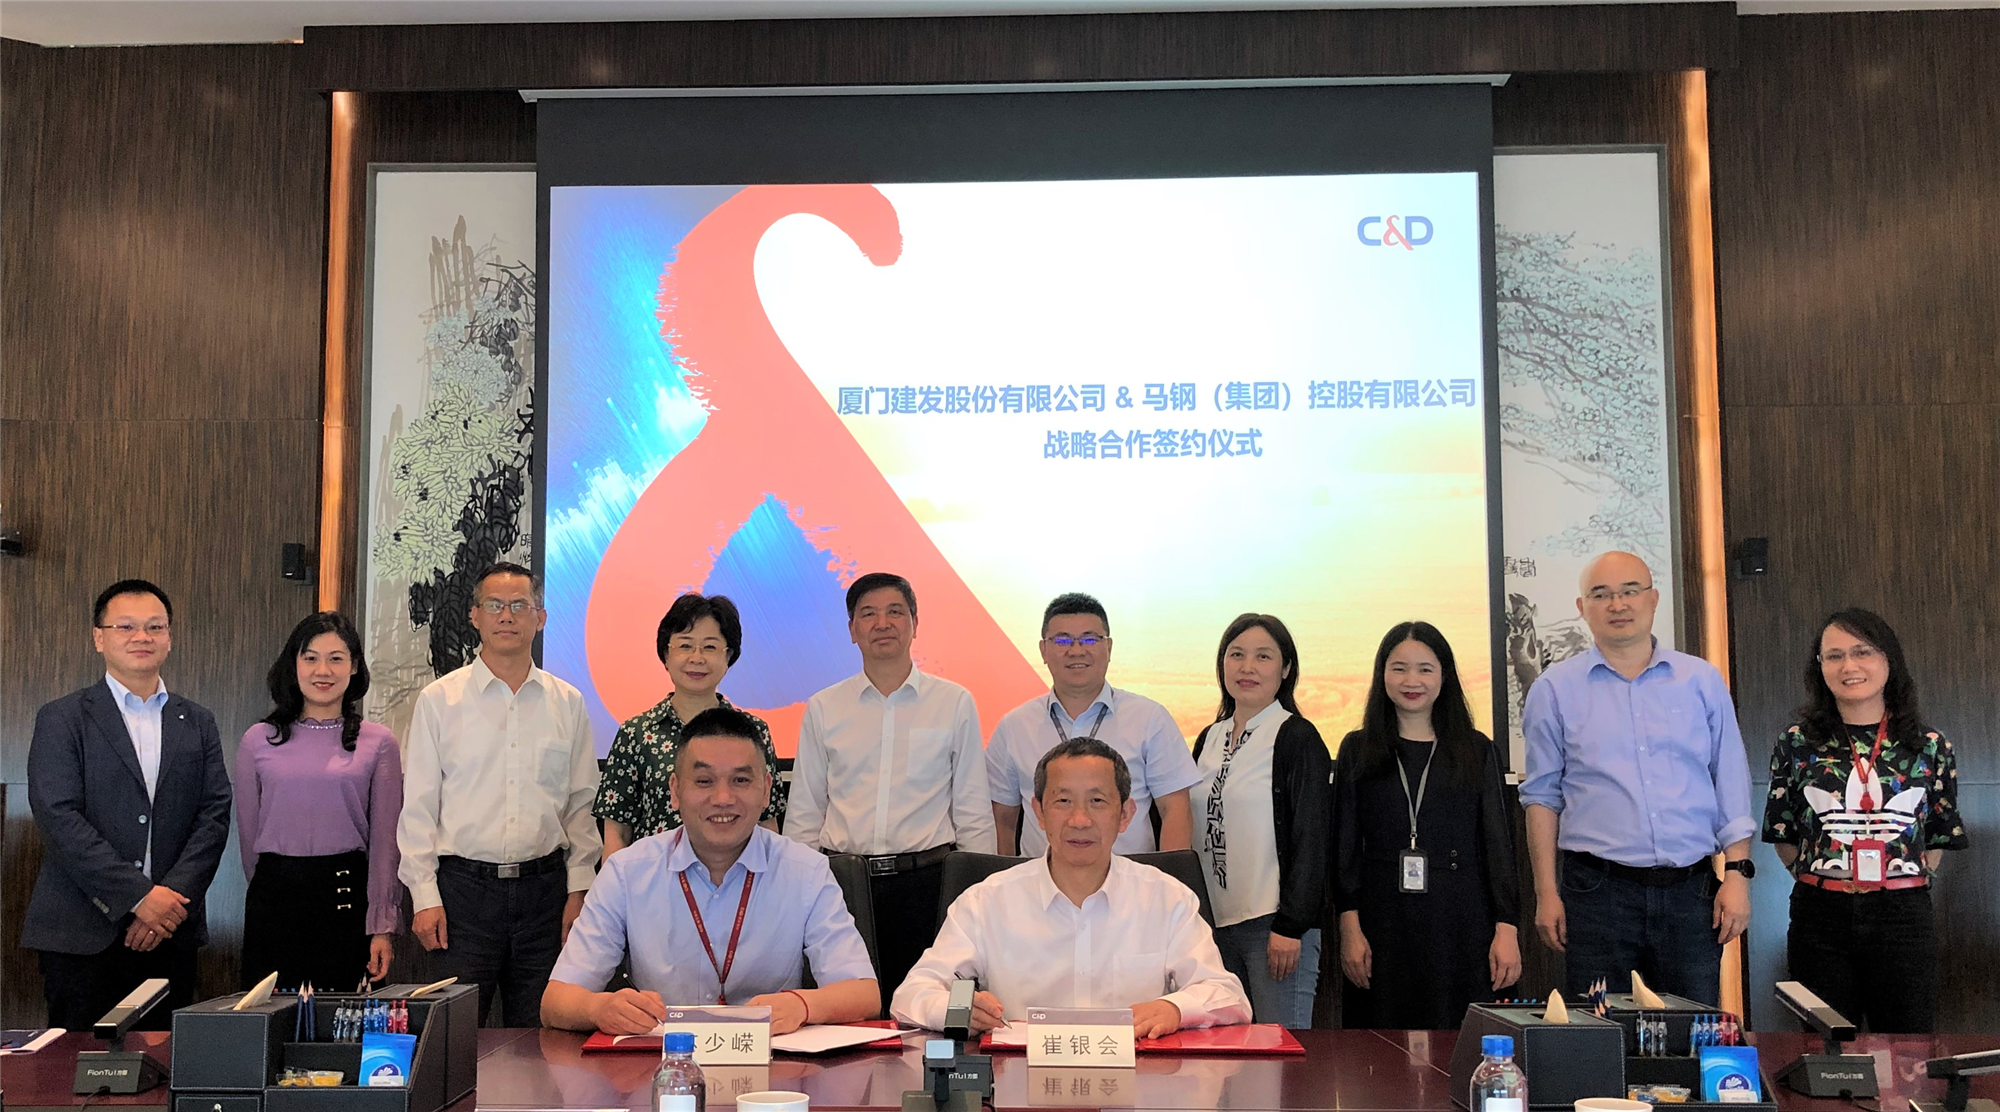 c&d iron & steel signs strategic cooperation agreement with magang (group)